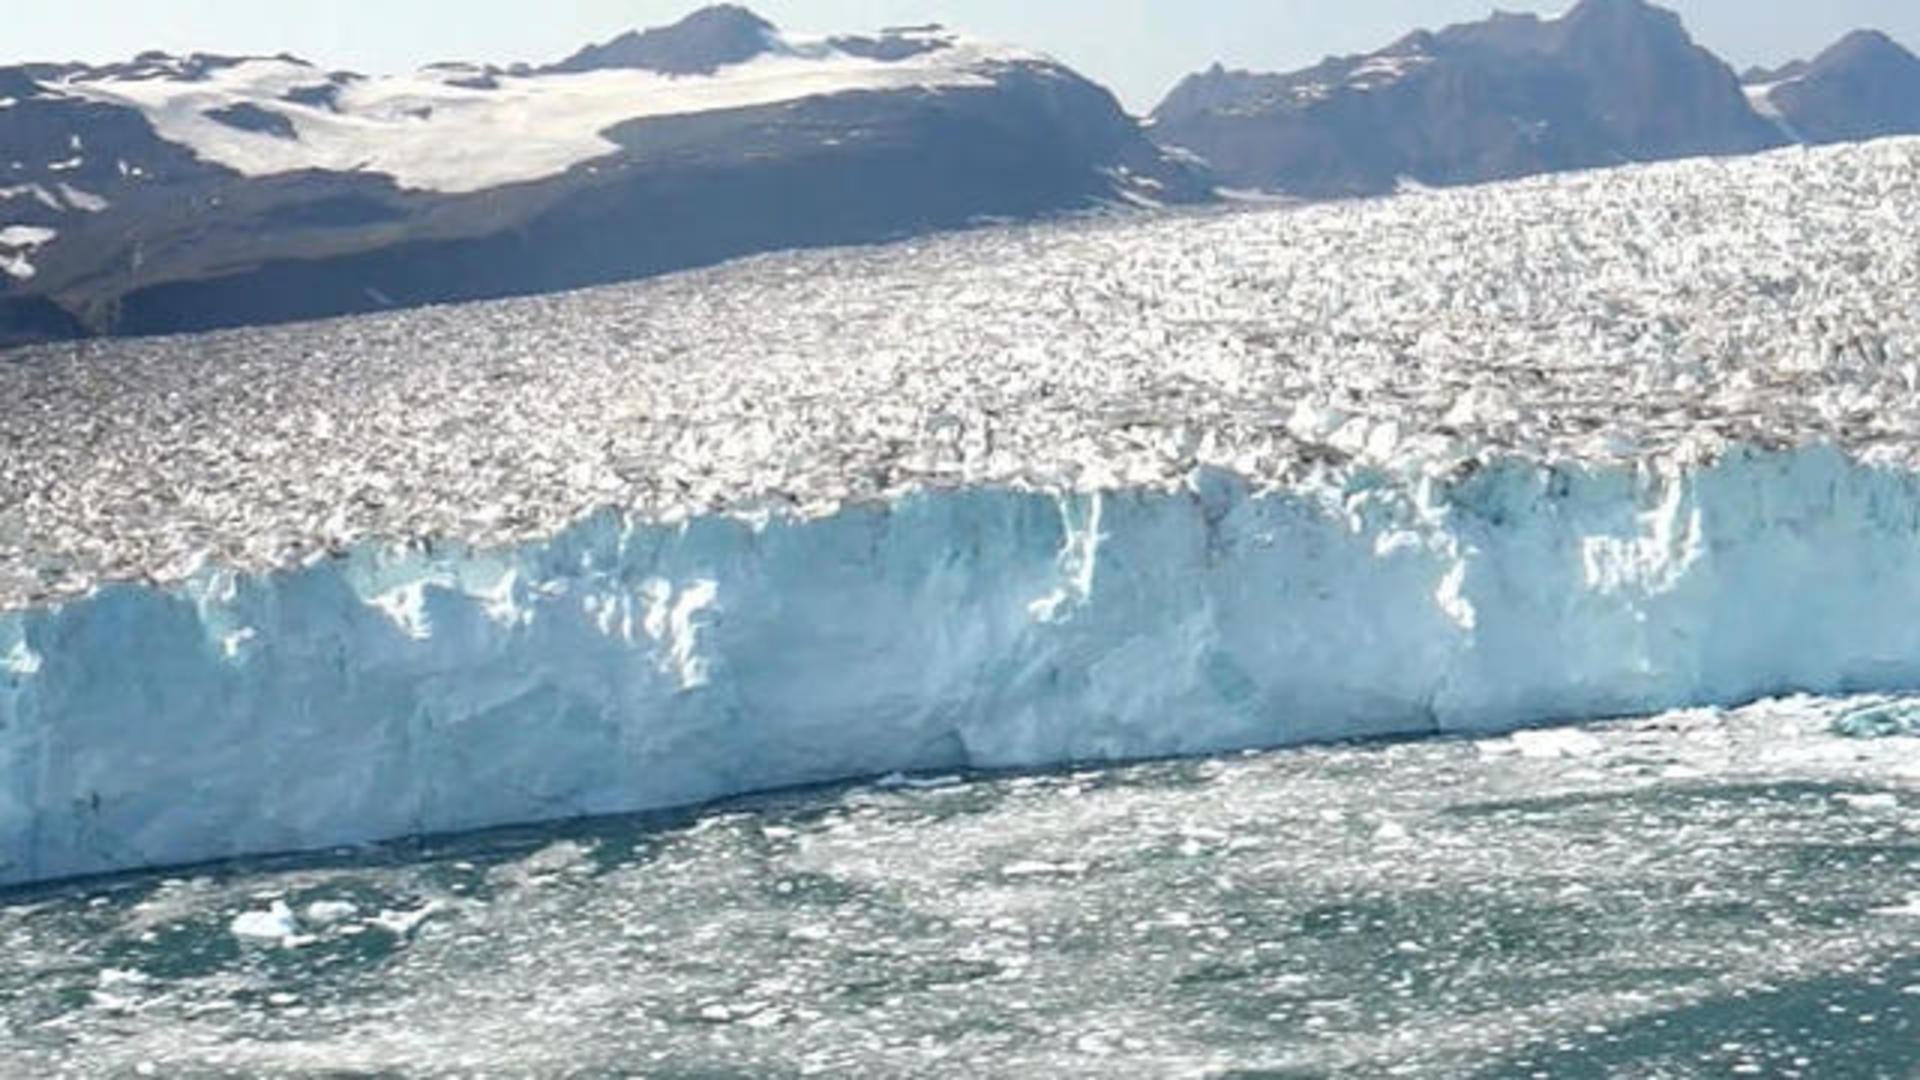 NASA scientists tracking Greenland's melting ice